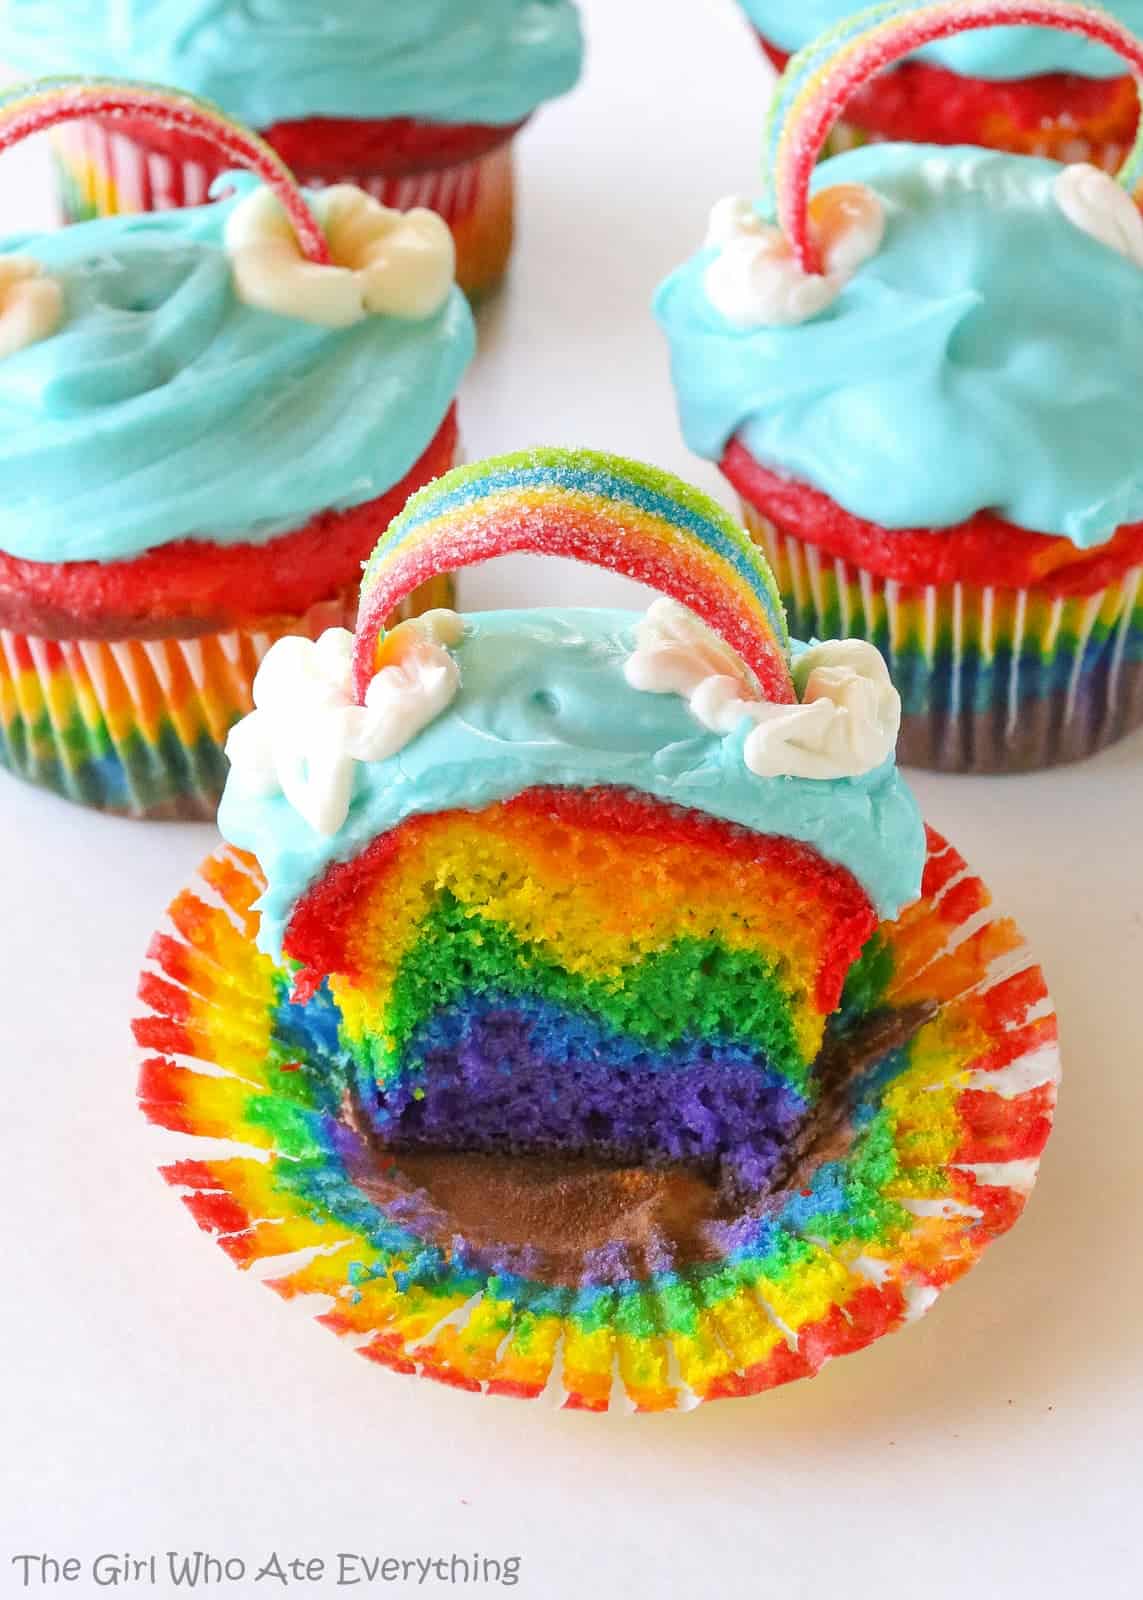 https://www.the-girl-who-ate-everything.com/wp-content/uploads/2010/03/rainbow-cupcakes-17.jpg